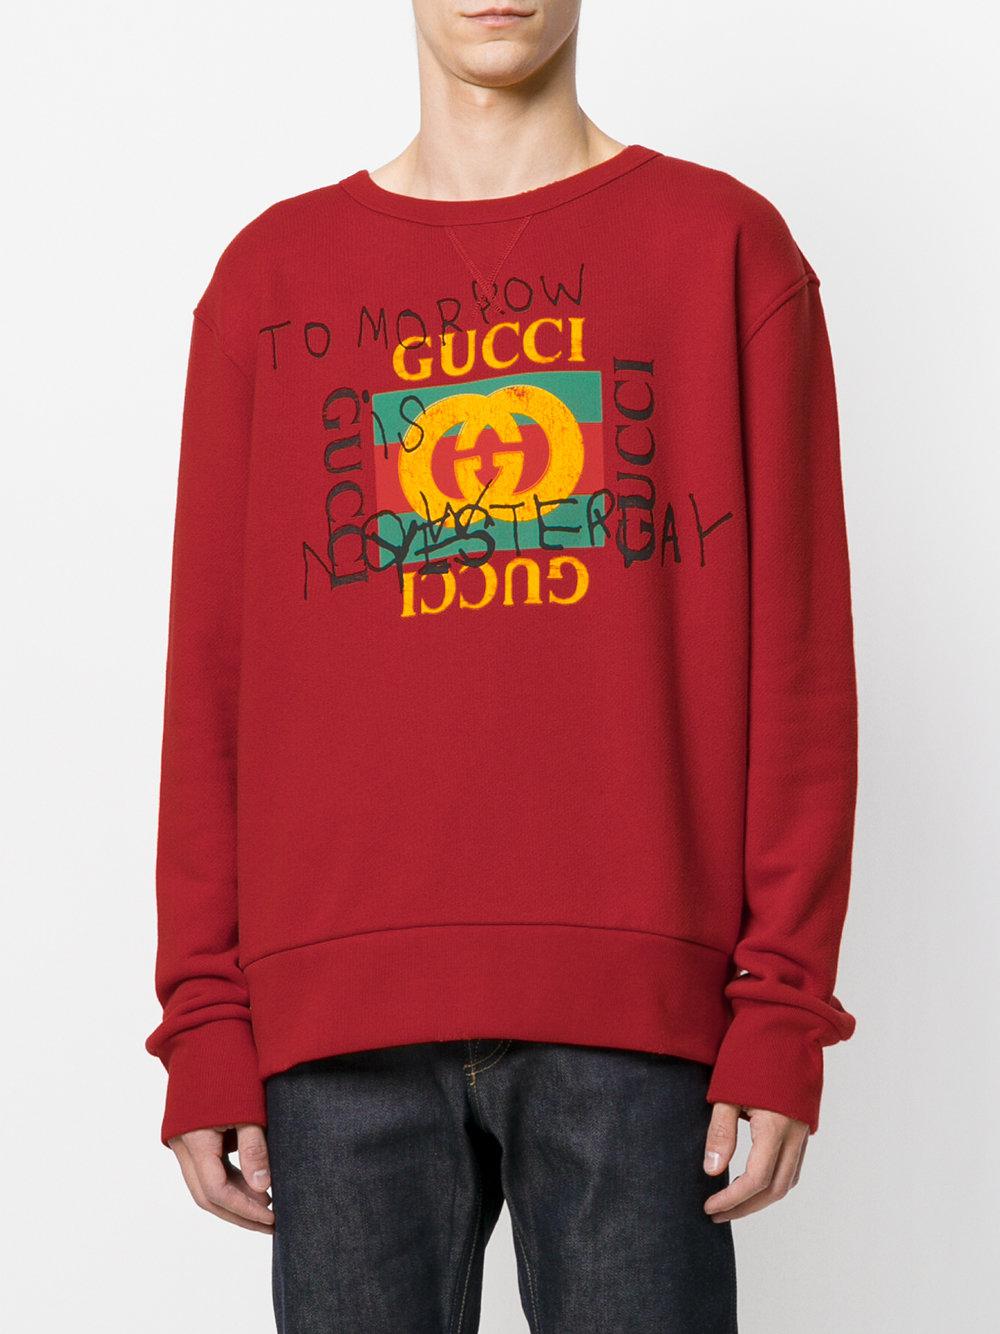 Lyst - Gucci Coco Capitán Logo Sweatshirt in Red for Men